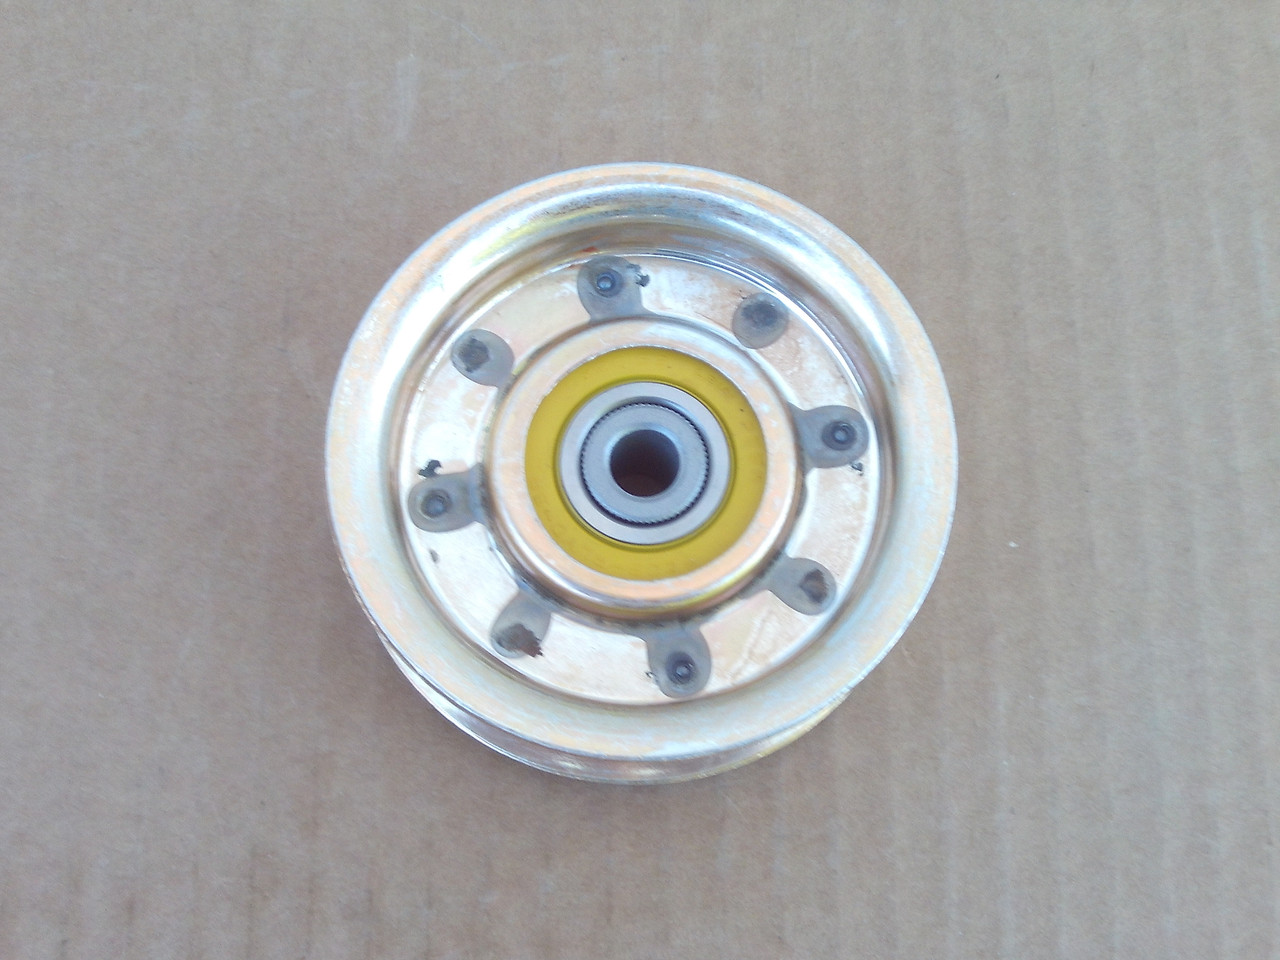 Idler Pulley for Cub Cadet Z Force 44, 48, 52" Cut Deck 02004558 flat, Height: 1-1/8" ID: 3/8" OD: 3-1/4" Made In USA